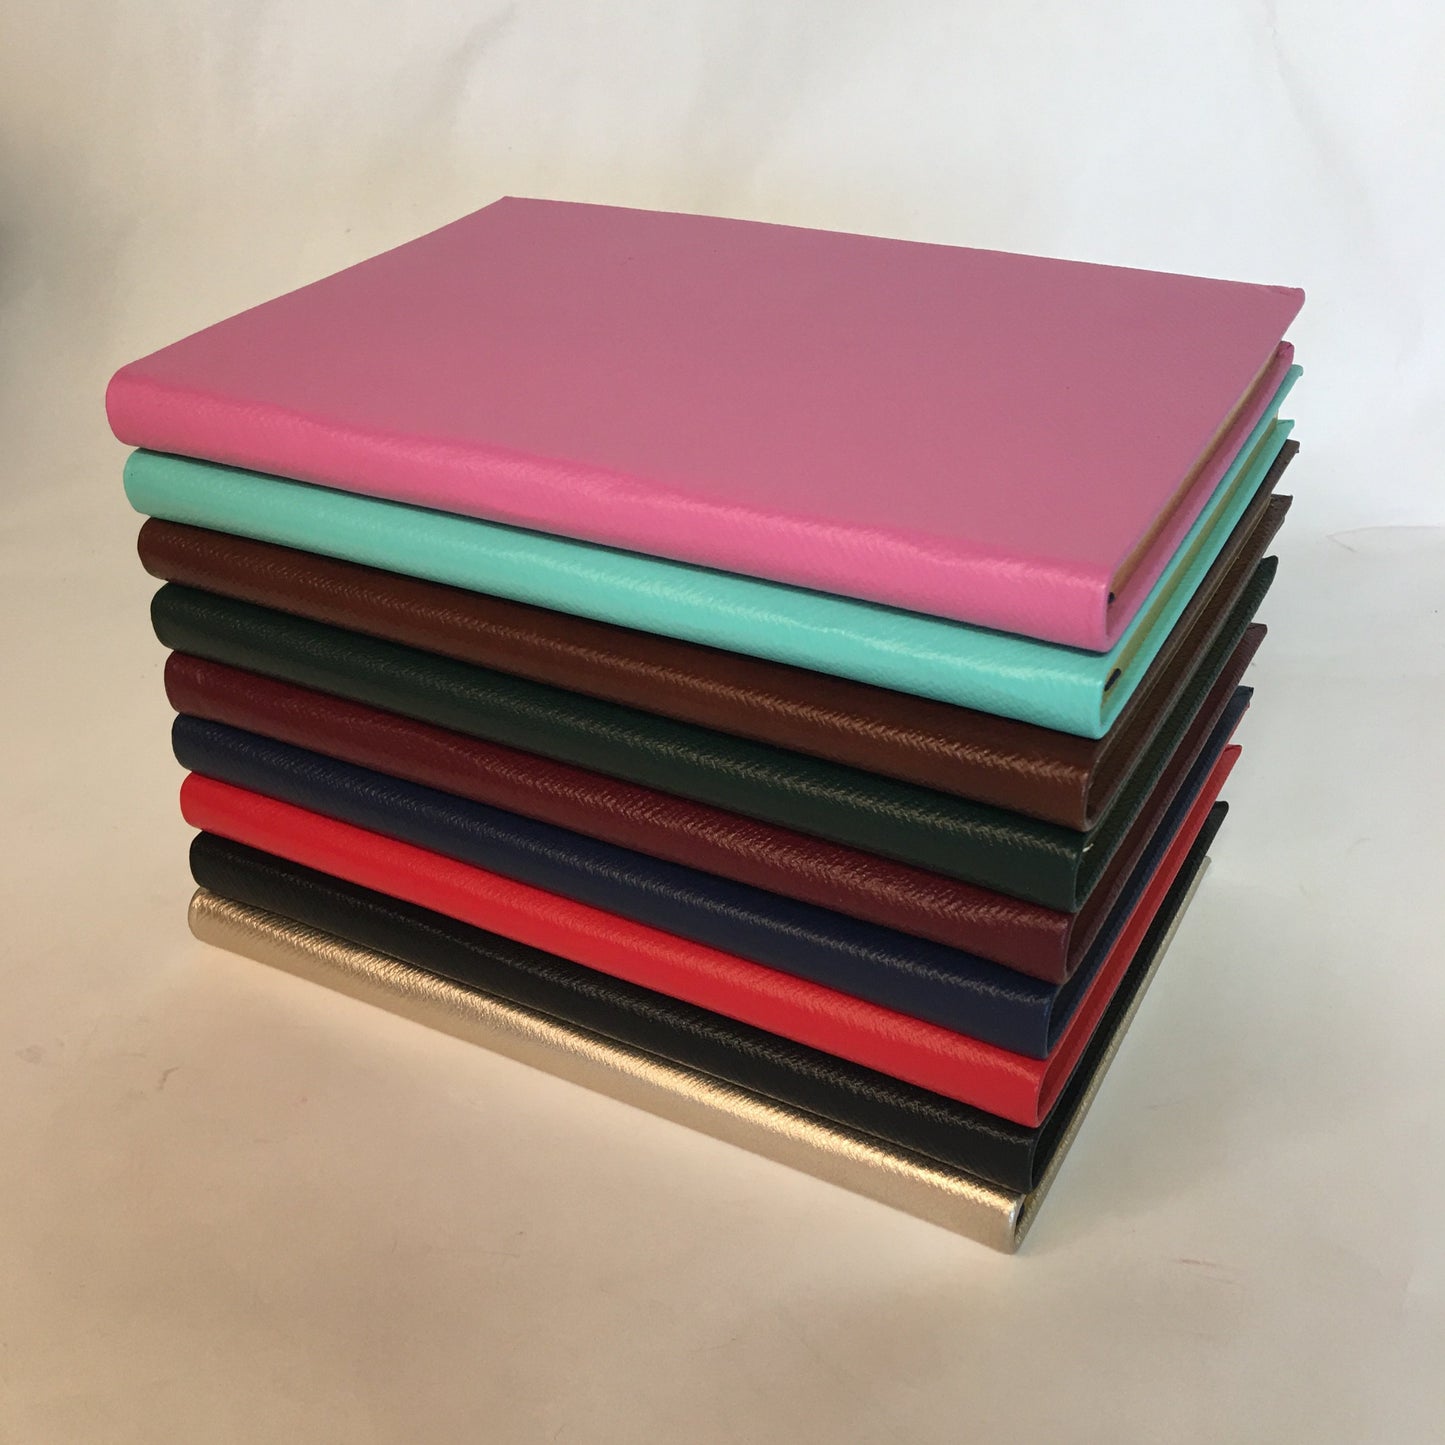 Leather Notebook | 8x6" | Crossgrain Leather | Lined Pages | MM86L